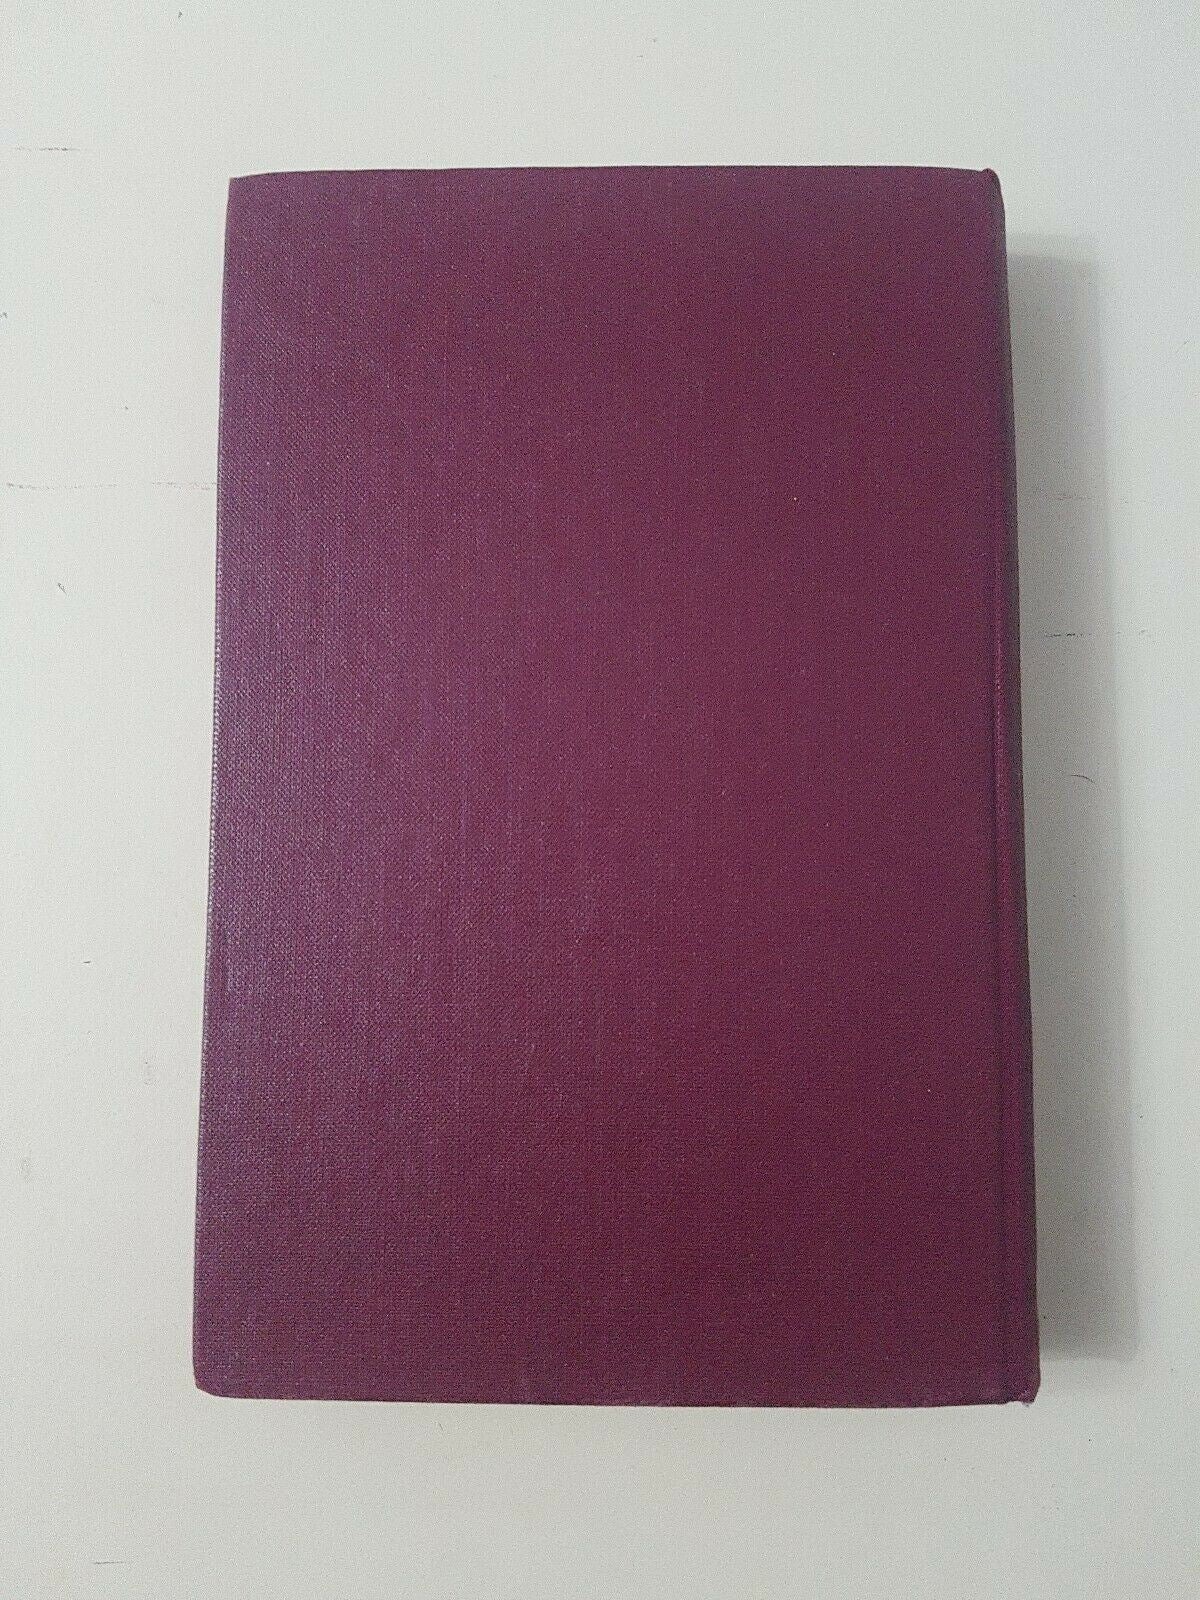 Eb3001 The  Methodist Hymnal Edited by Hazel Watson Viney Ltd Red Edged pages